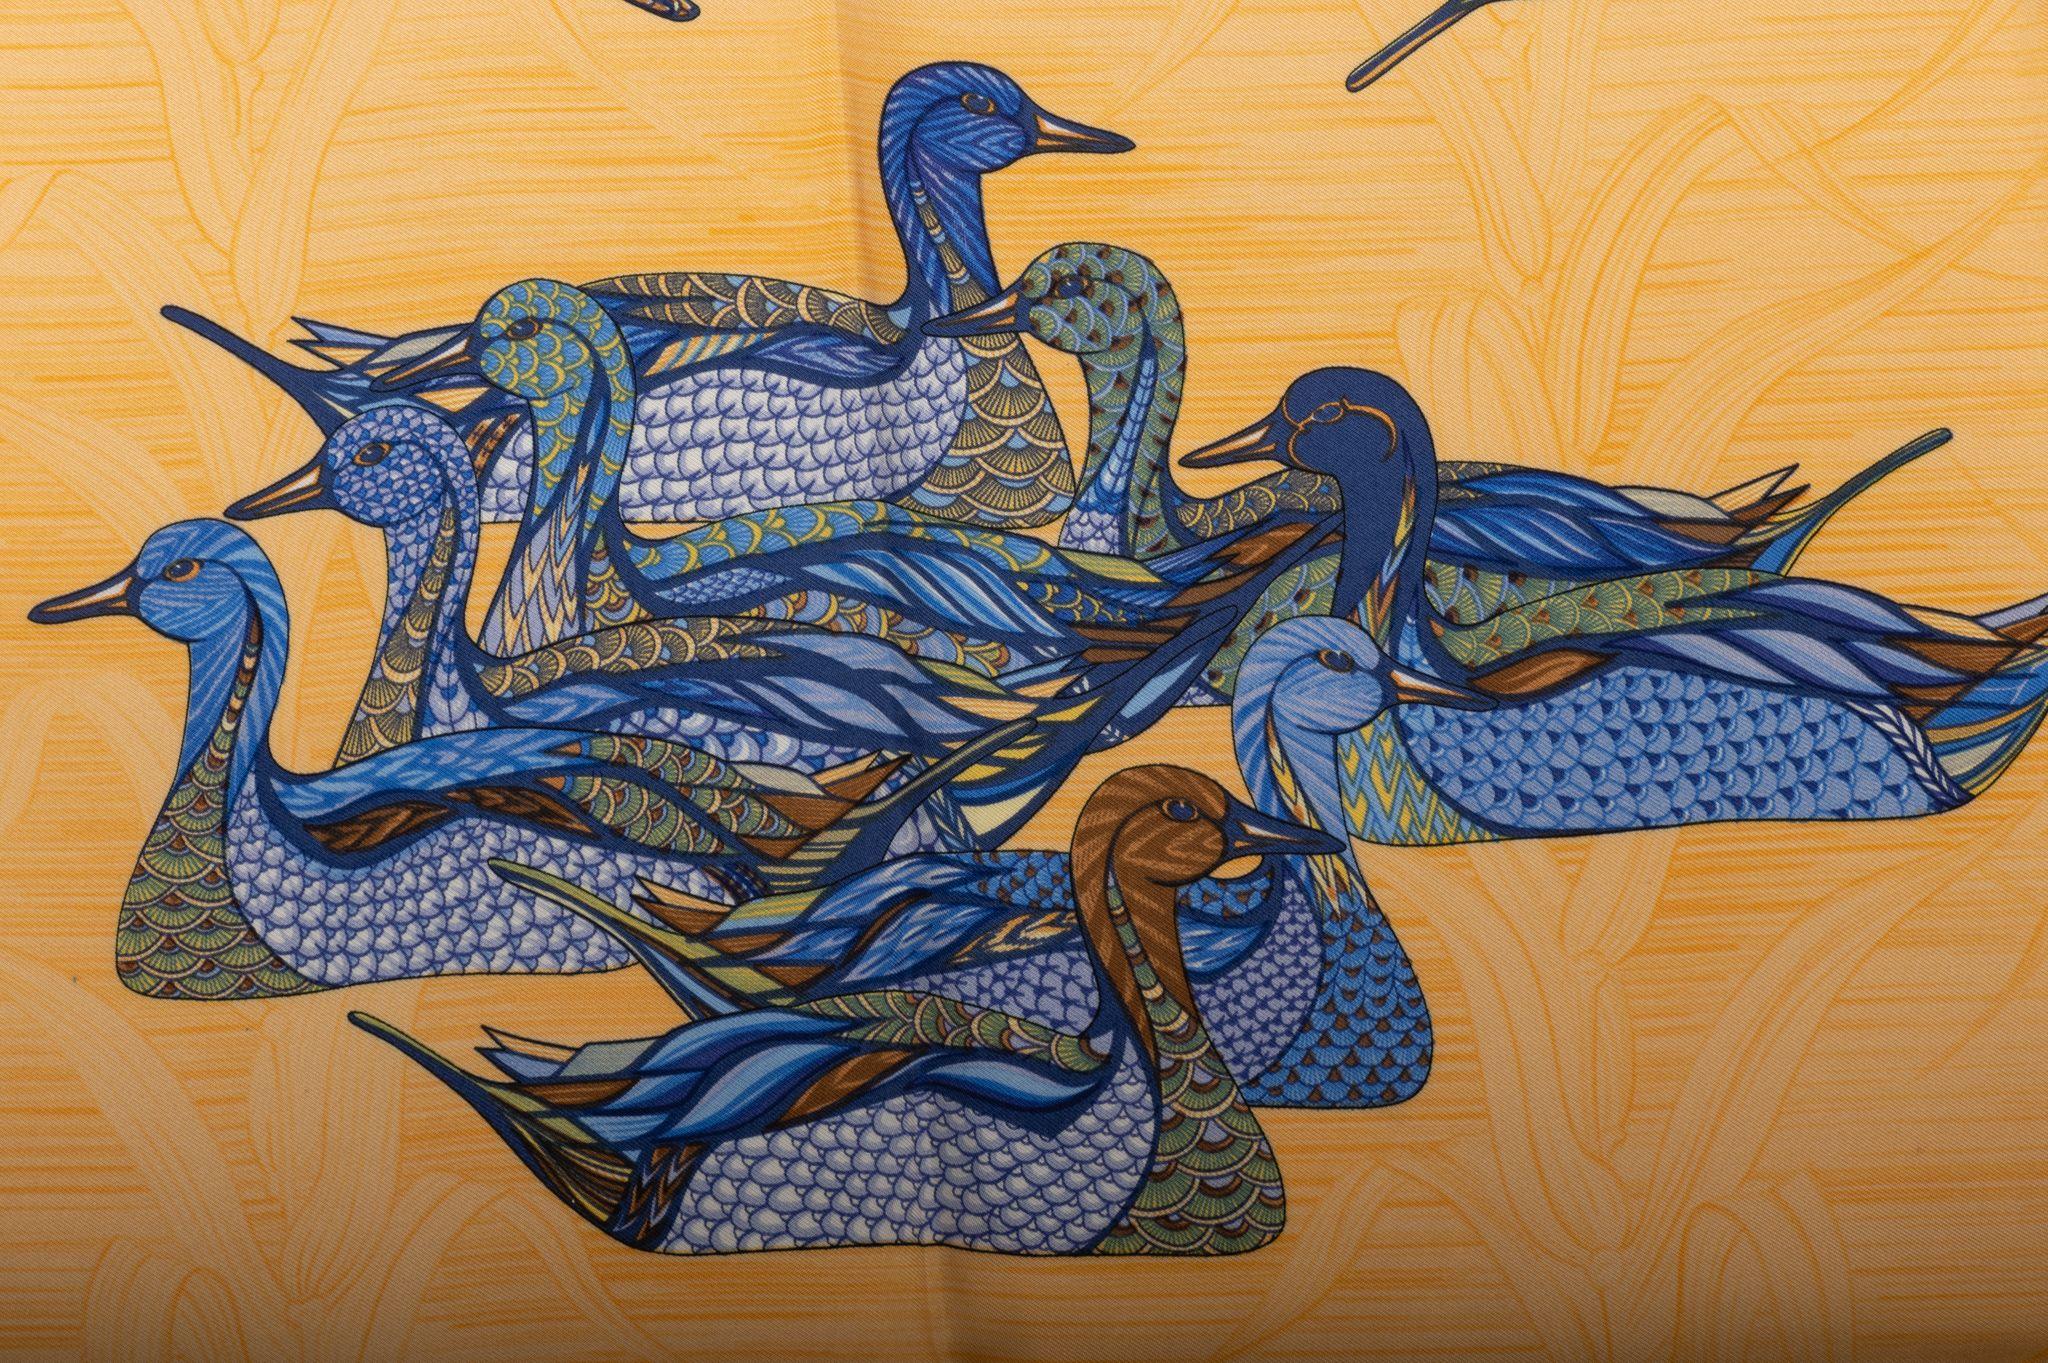 Hermes Apricot/Blue Ducks Silk Scarf In Excellent Condition For Sale In West Hollywood, CA